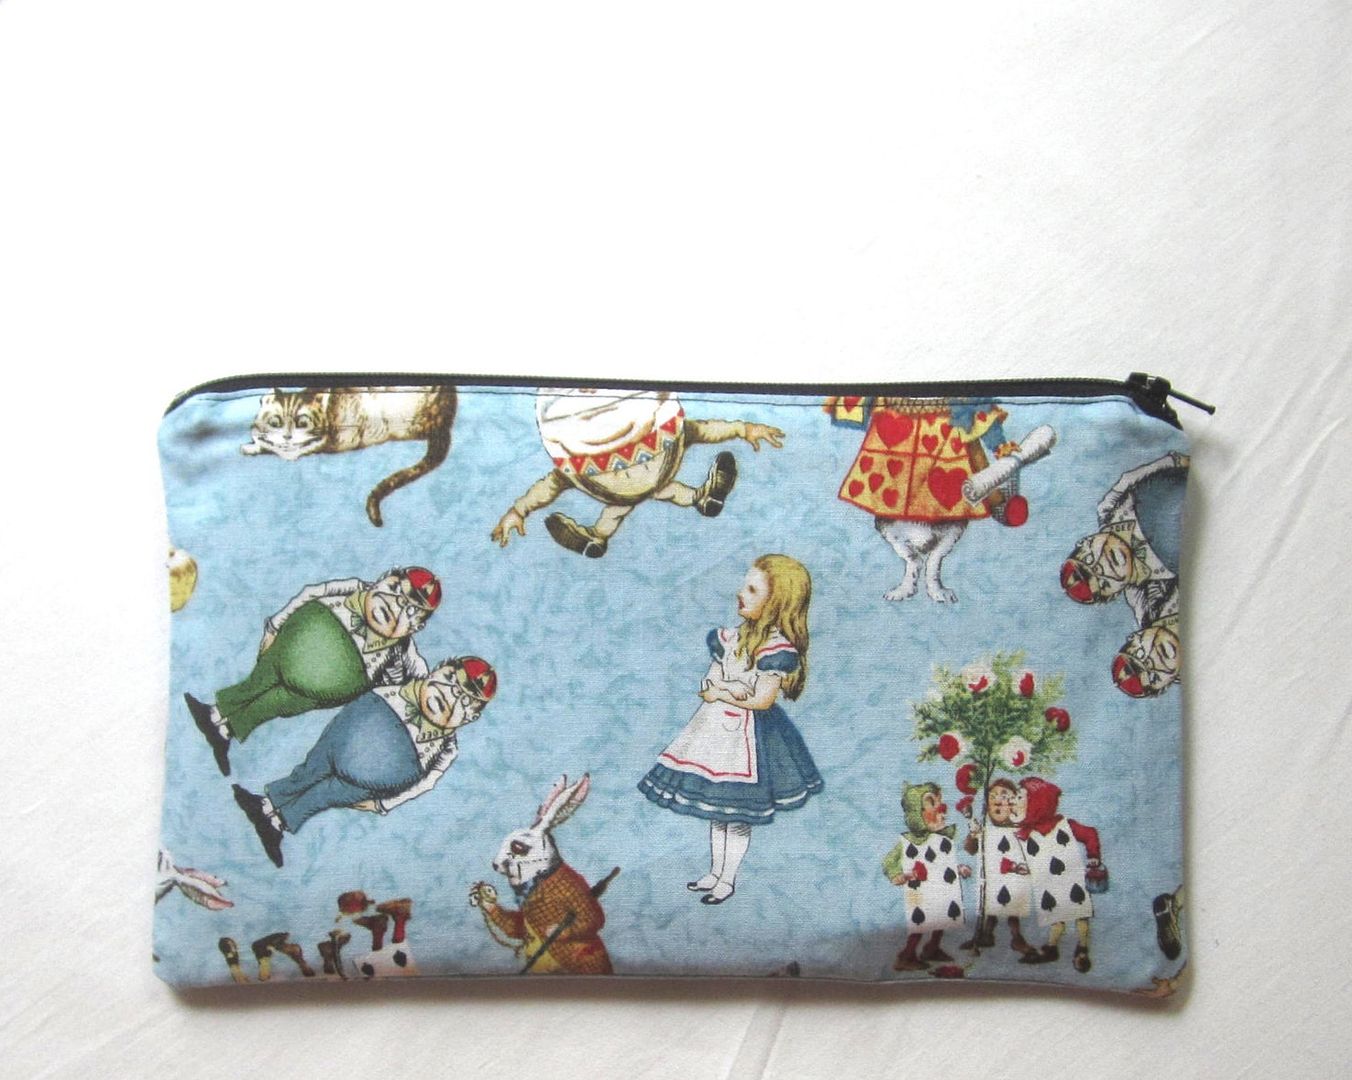 Pencil cases for writers, readers and book lovers: Alice in Wonderland vintage illustration pencil case on Etsy